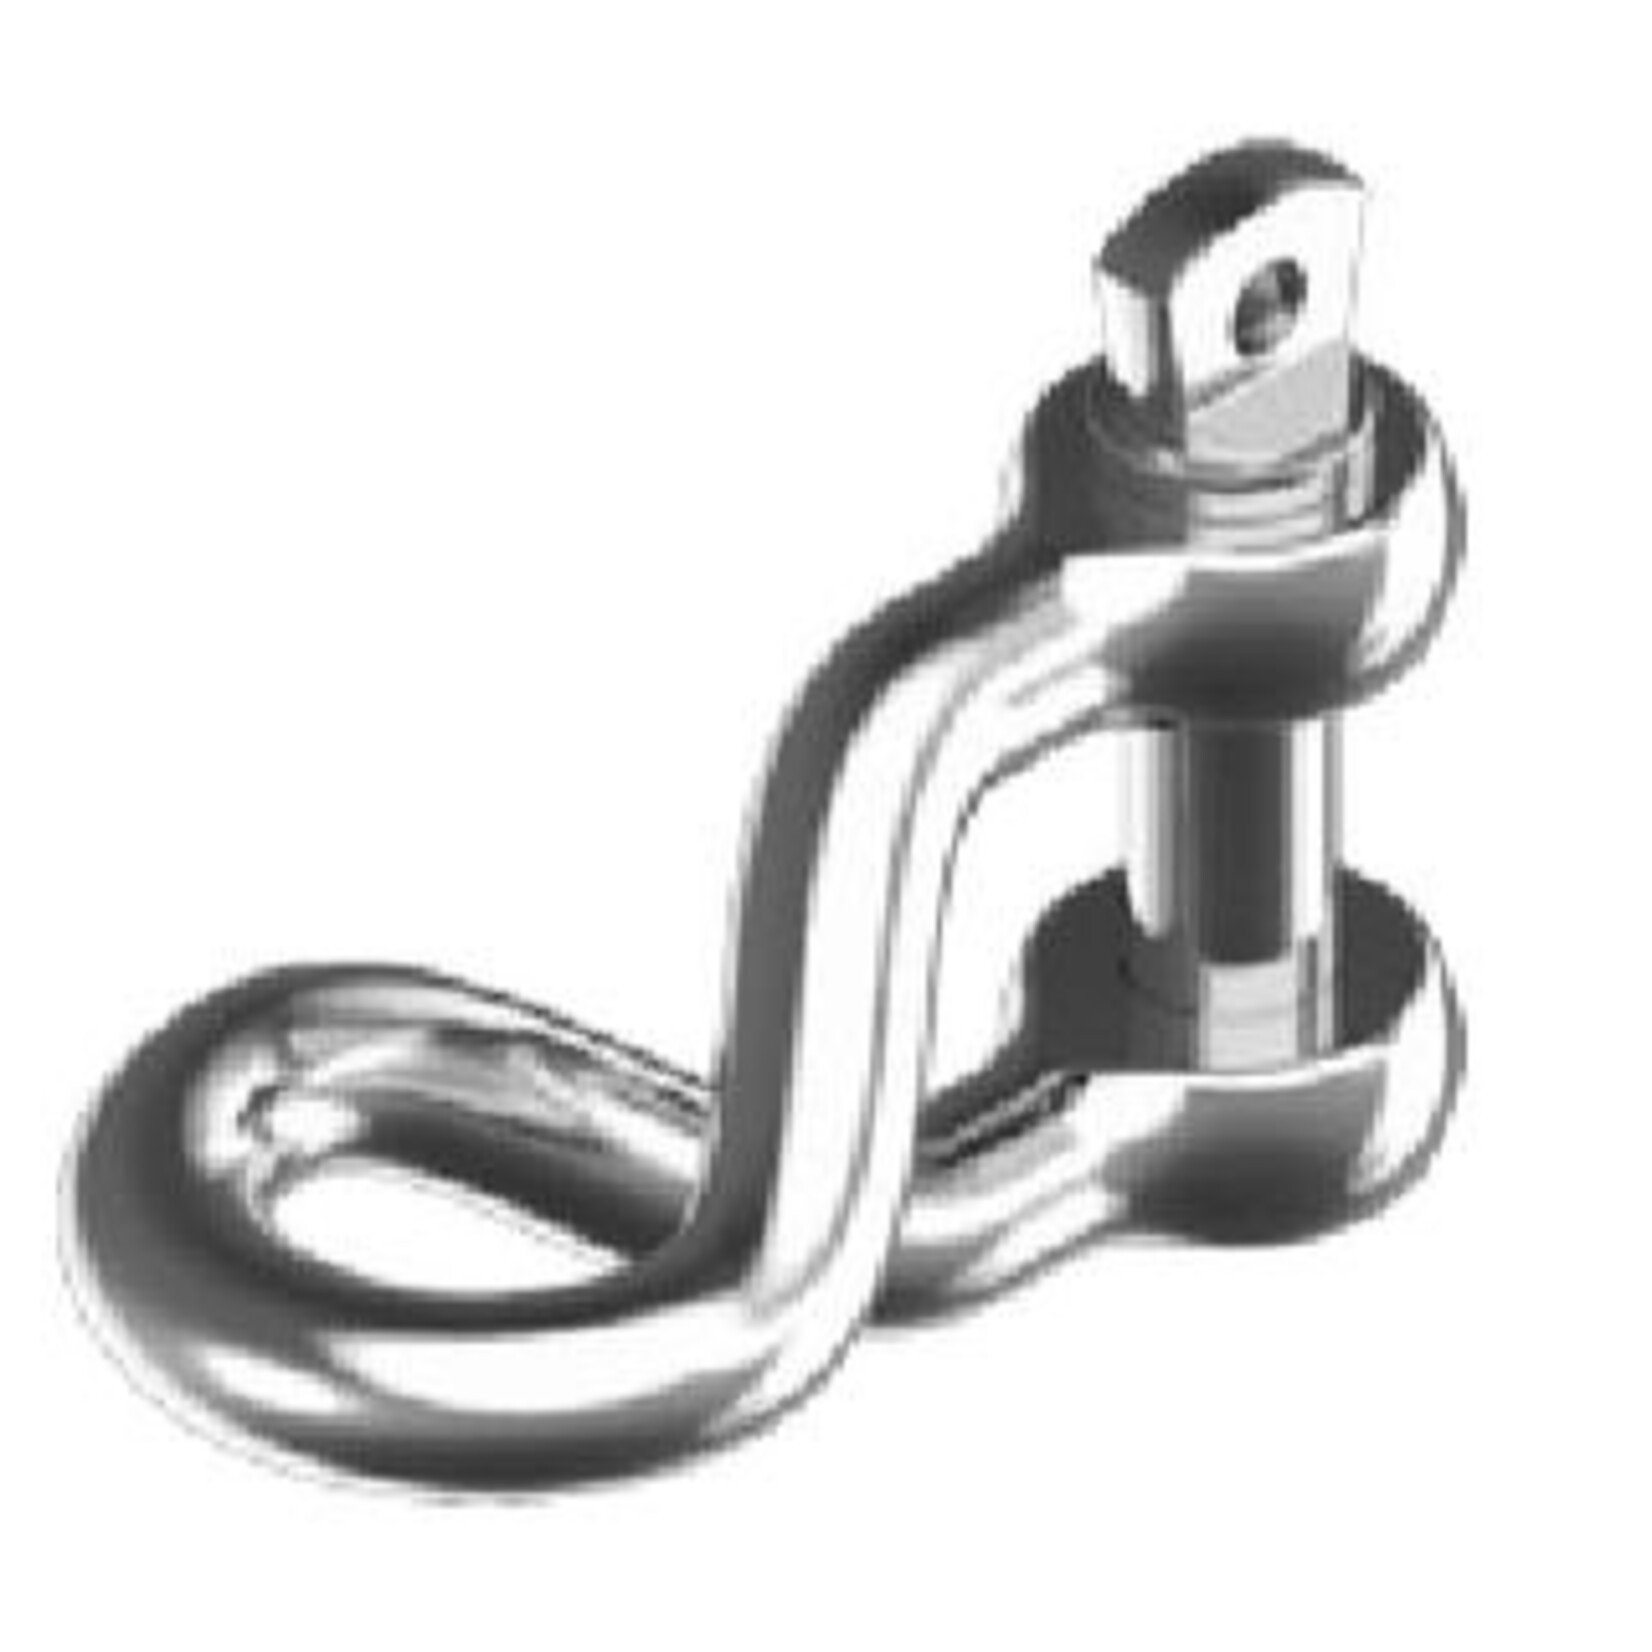 Stainless twisted shackle 5mm 10 pcs